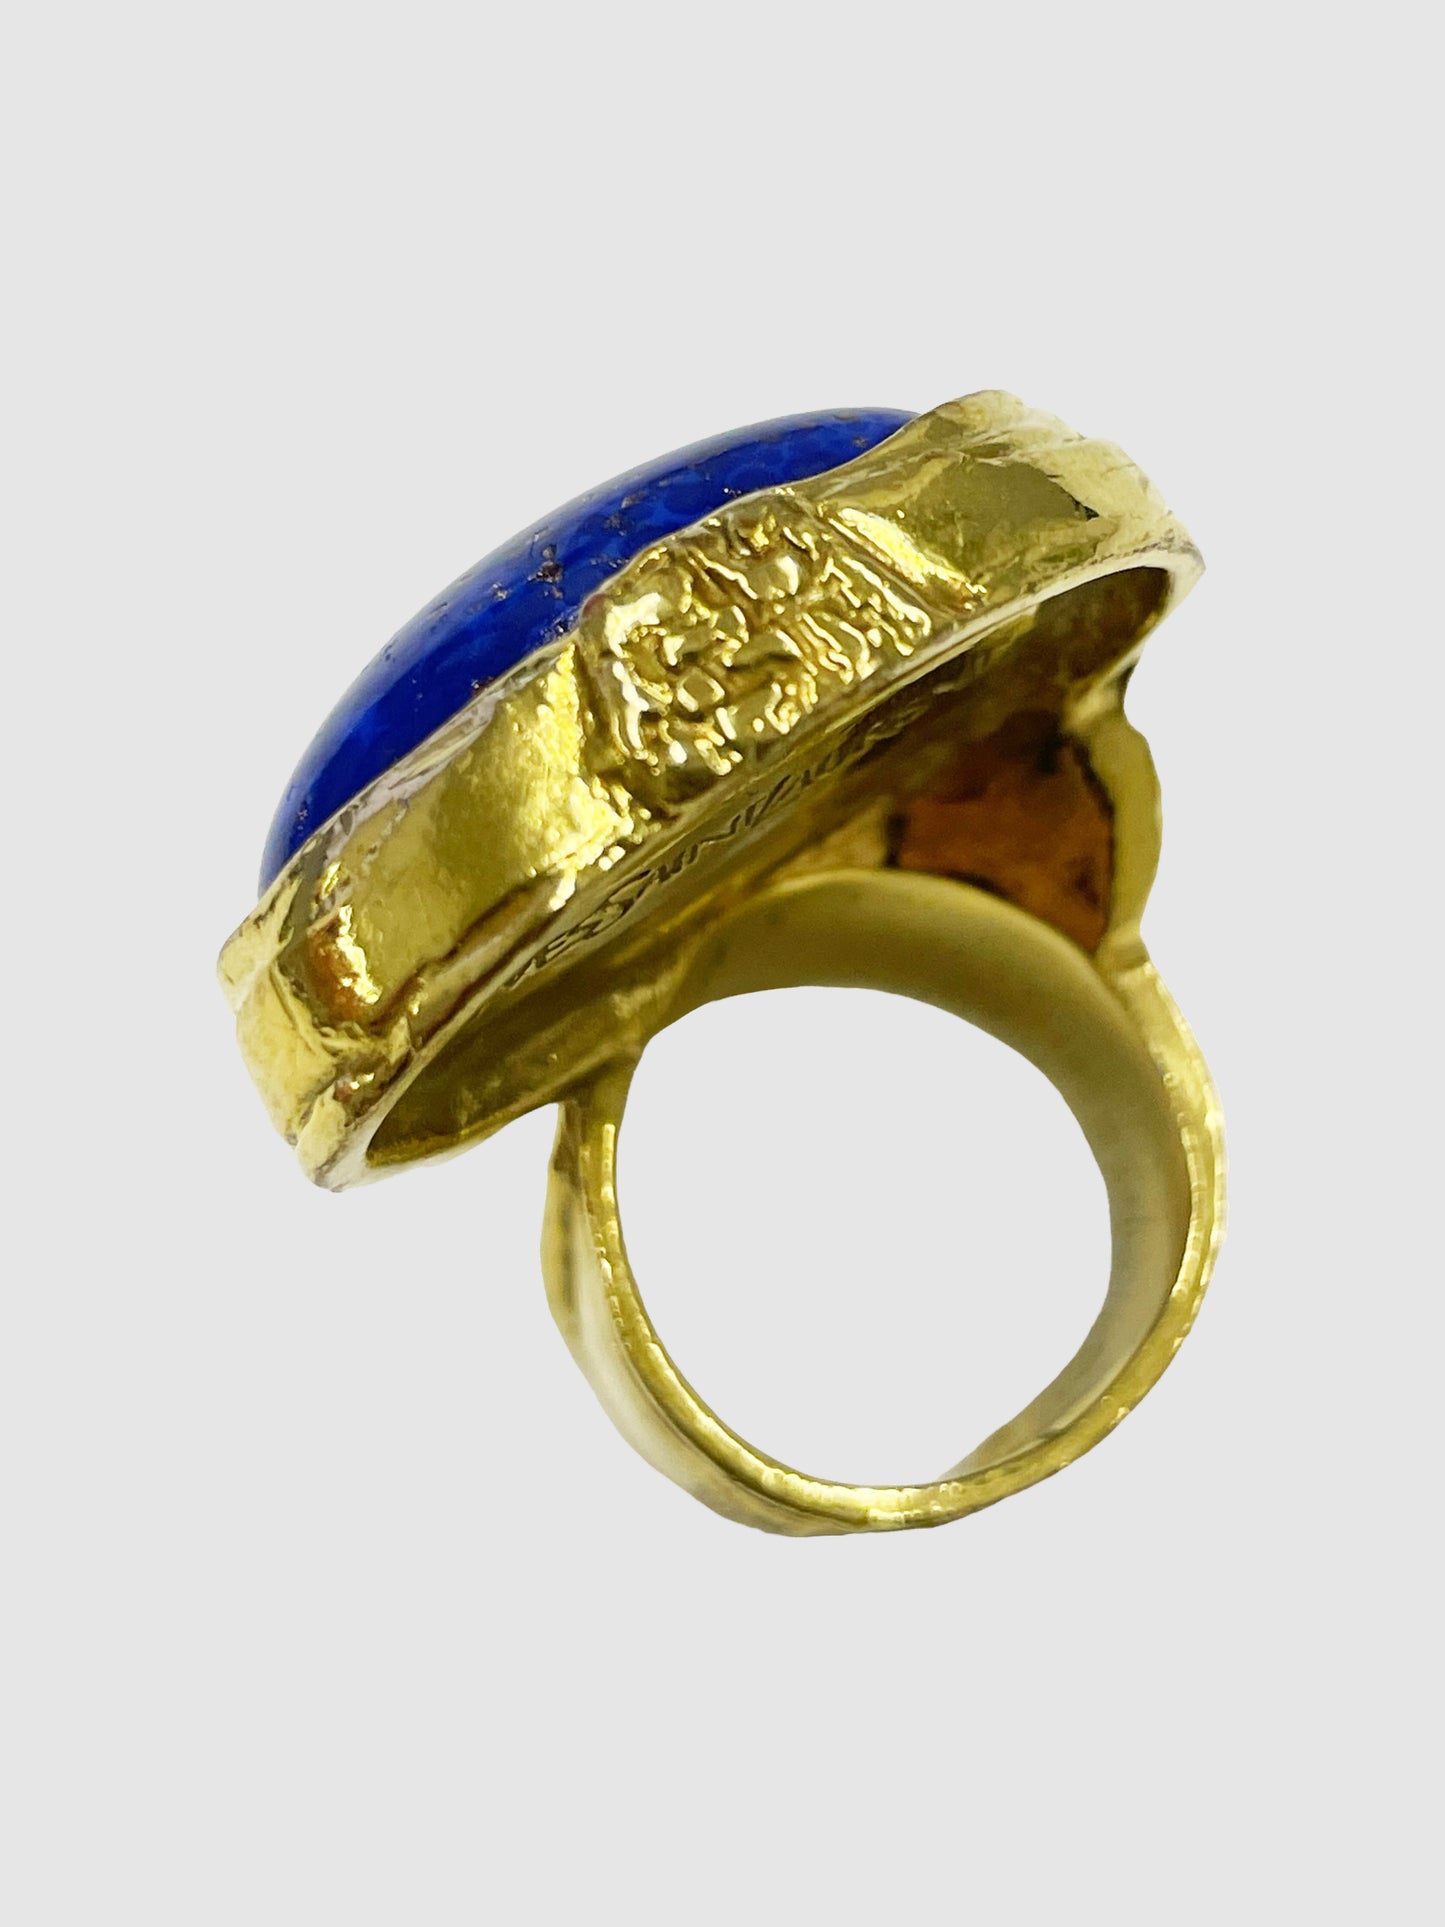 Yves Saint Laurent Arty Cocktail Ring - Size 6